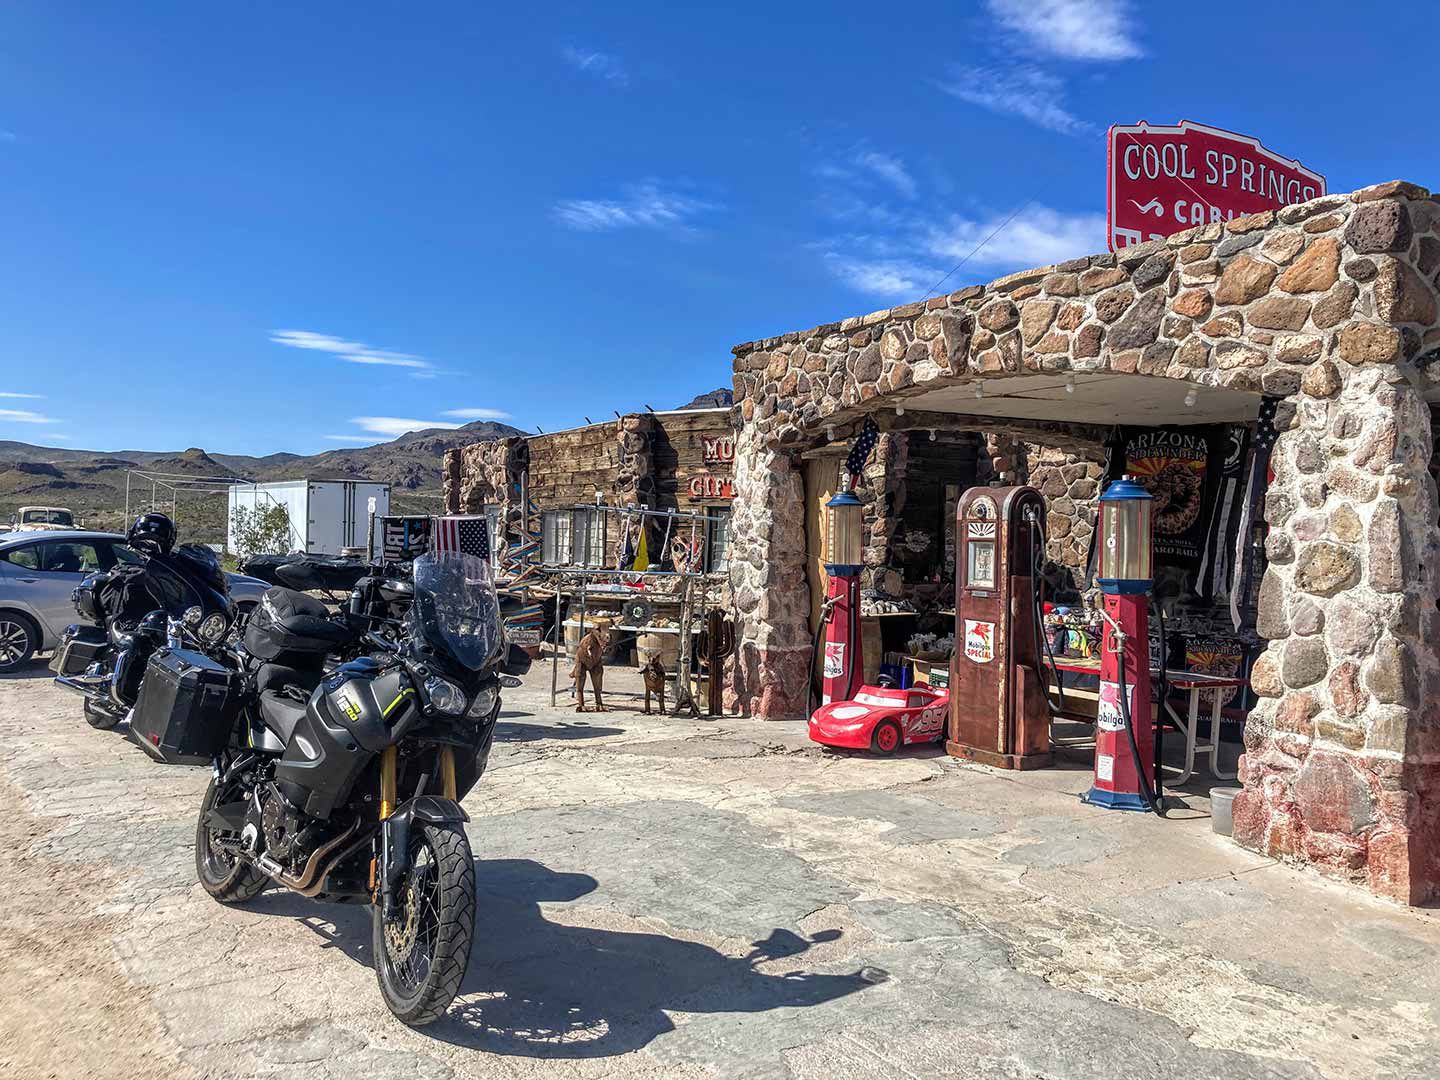 Cool Springs Station on Route 10 (Route 66), between Kingman and Oatman.